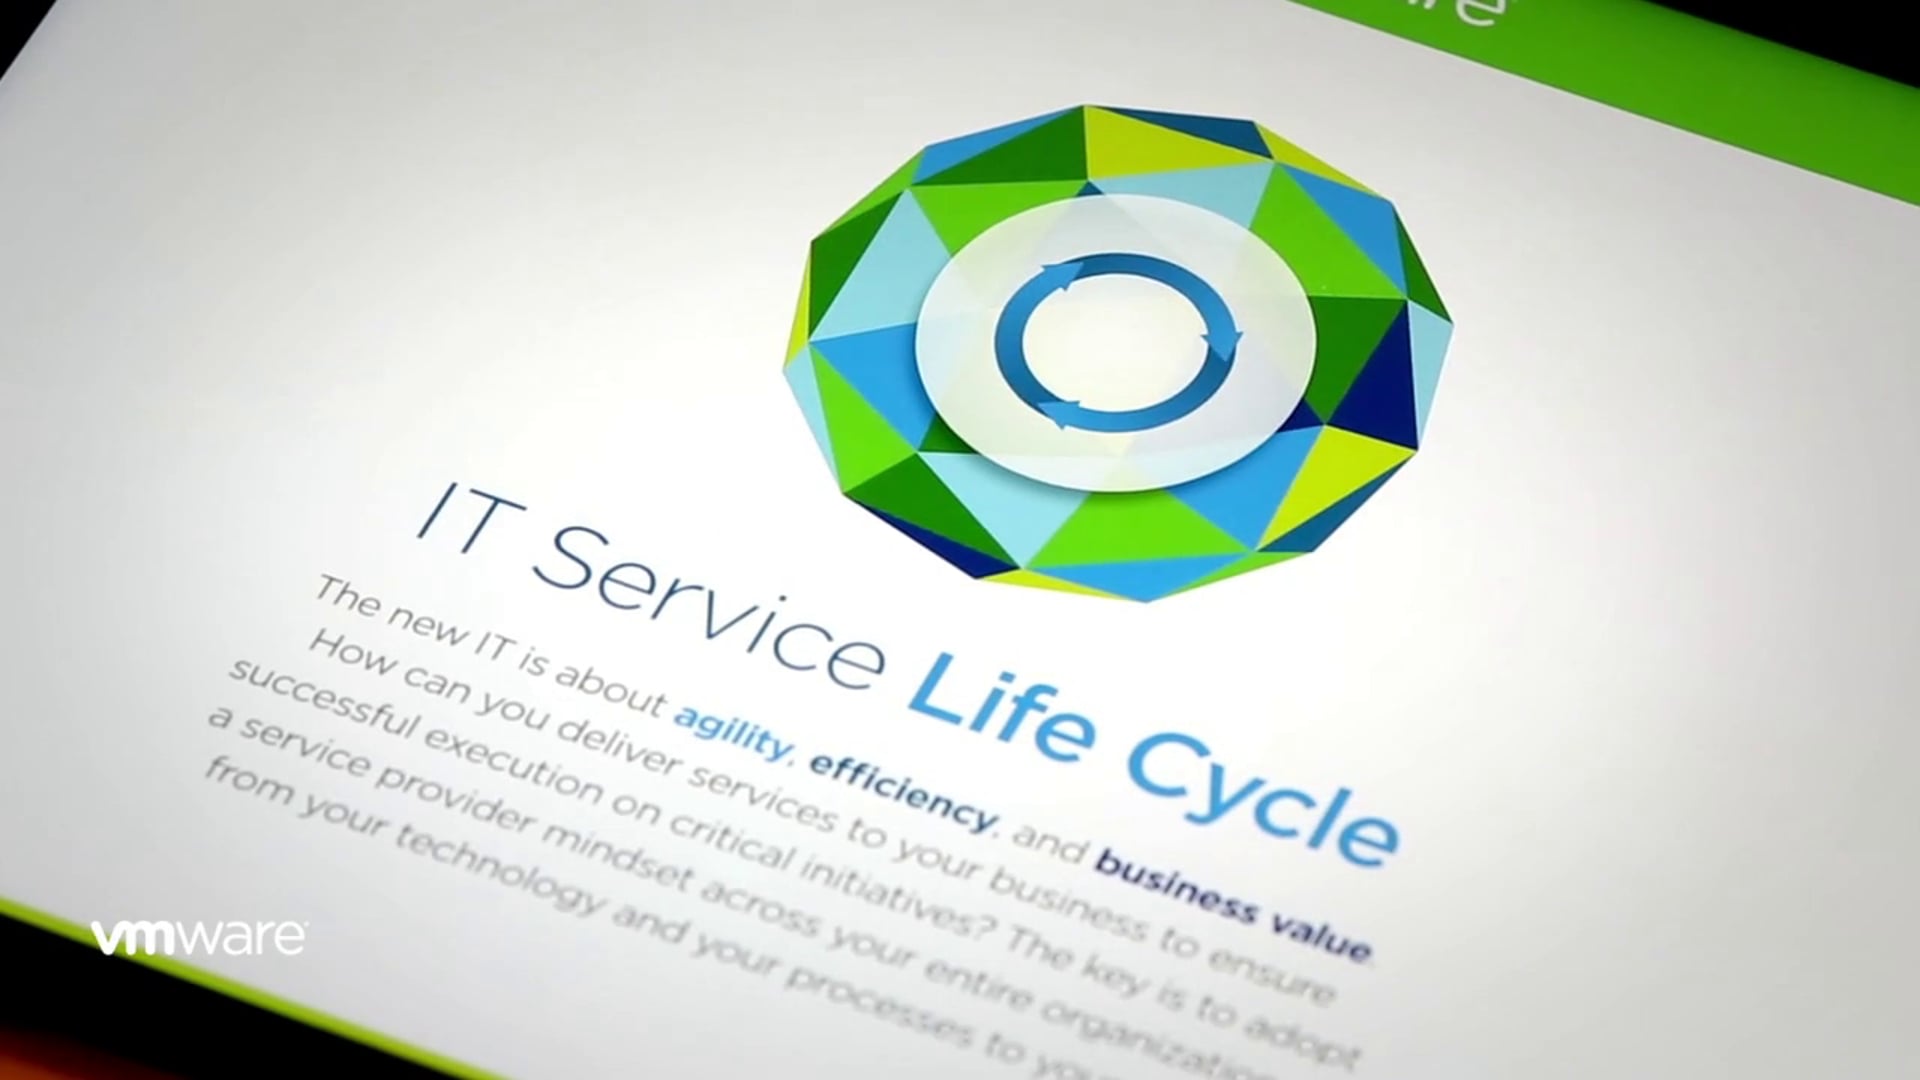 VMware IT Life Cycle Tablet Interactive